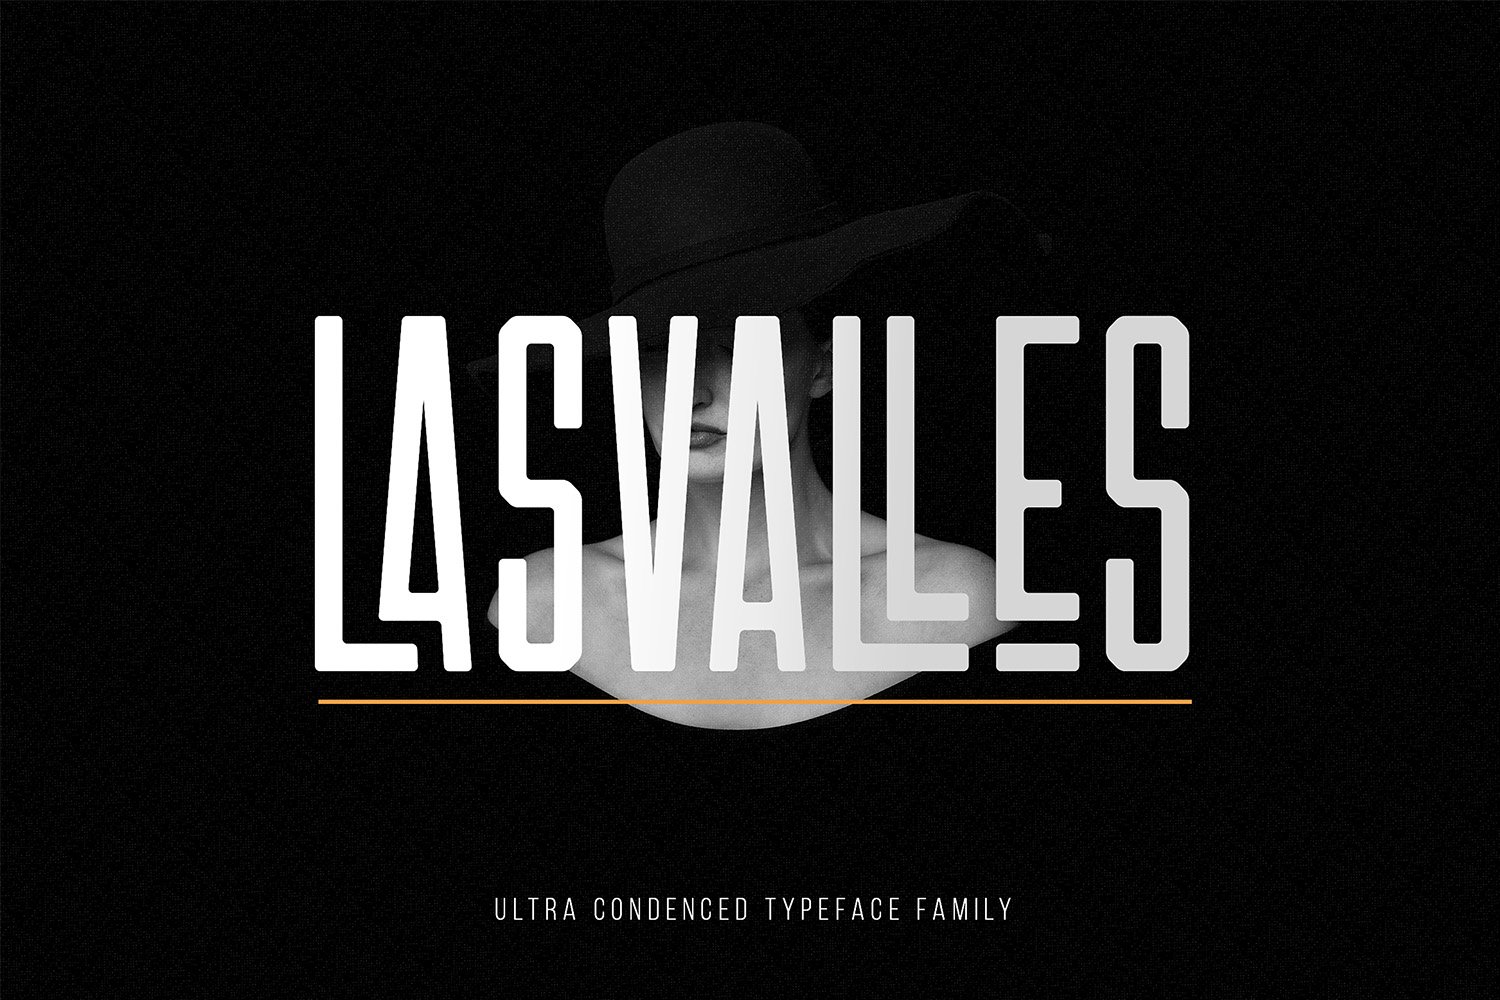 Las Valles Ultra Condensed Typeface cover image.